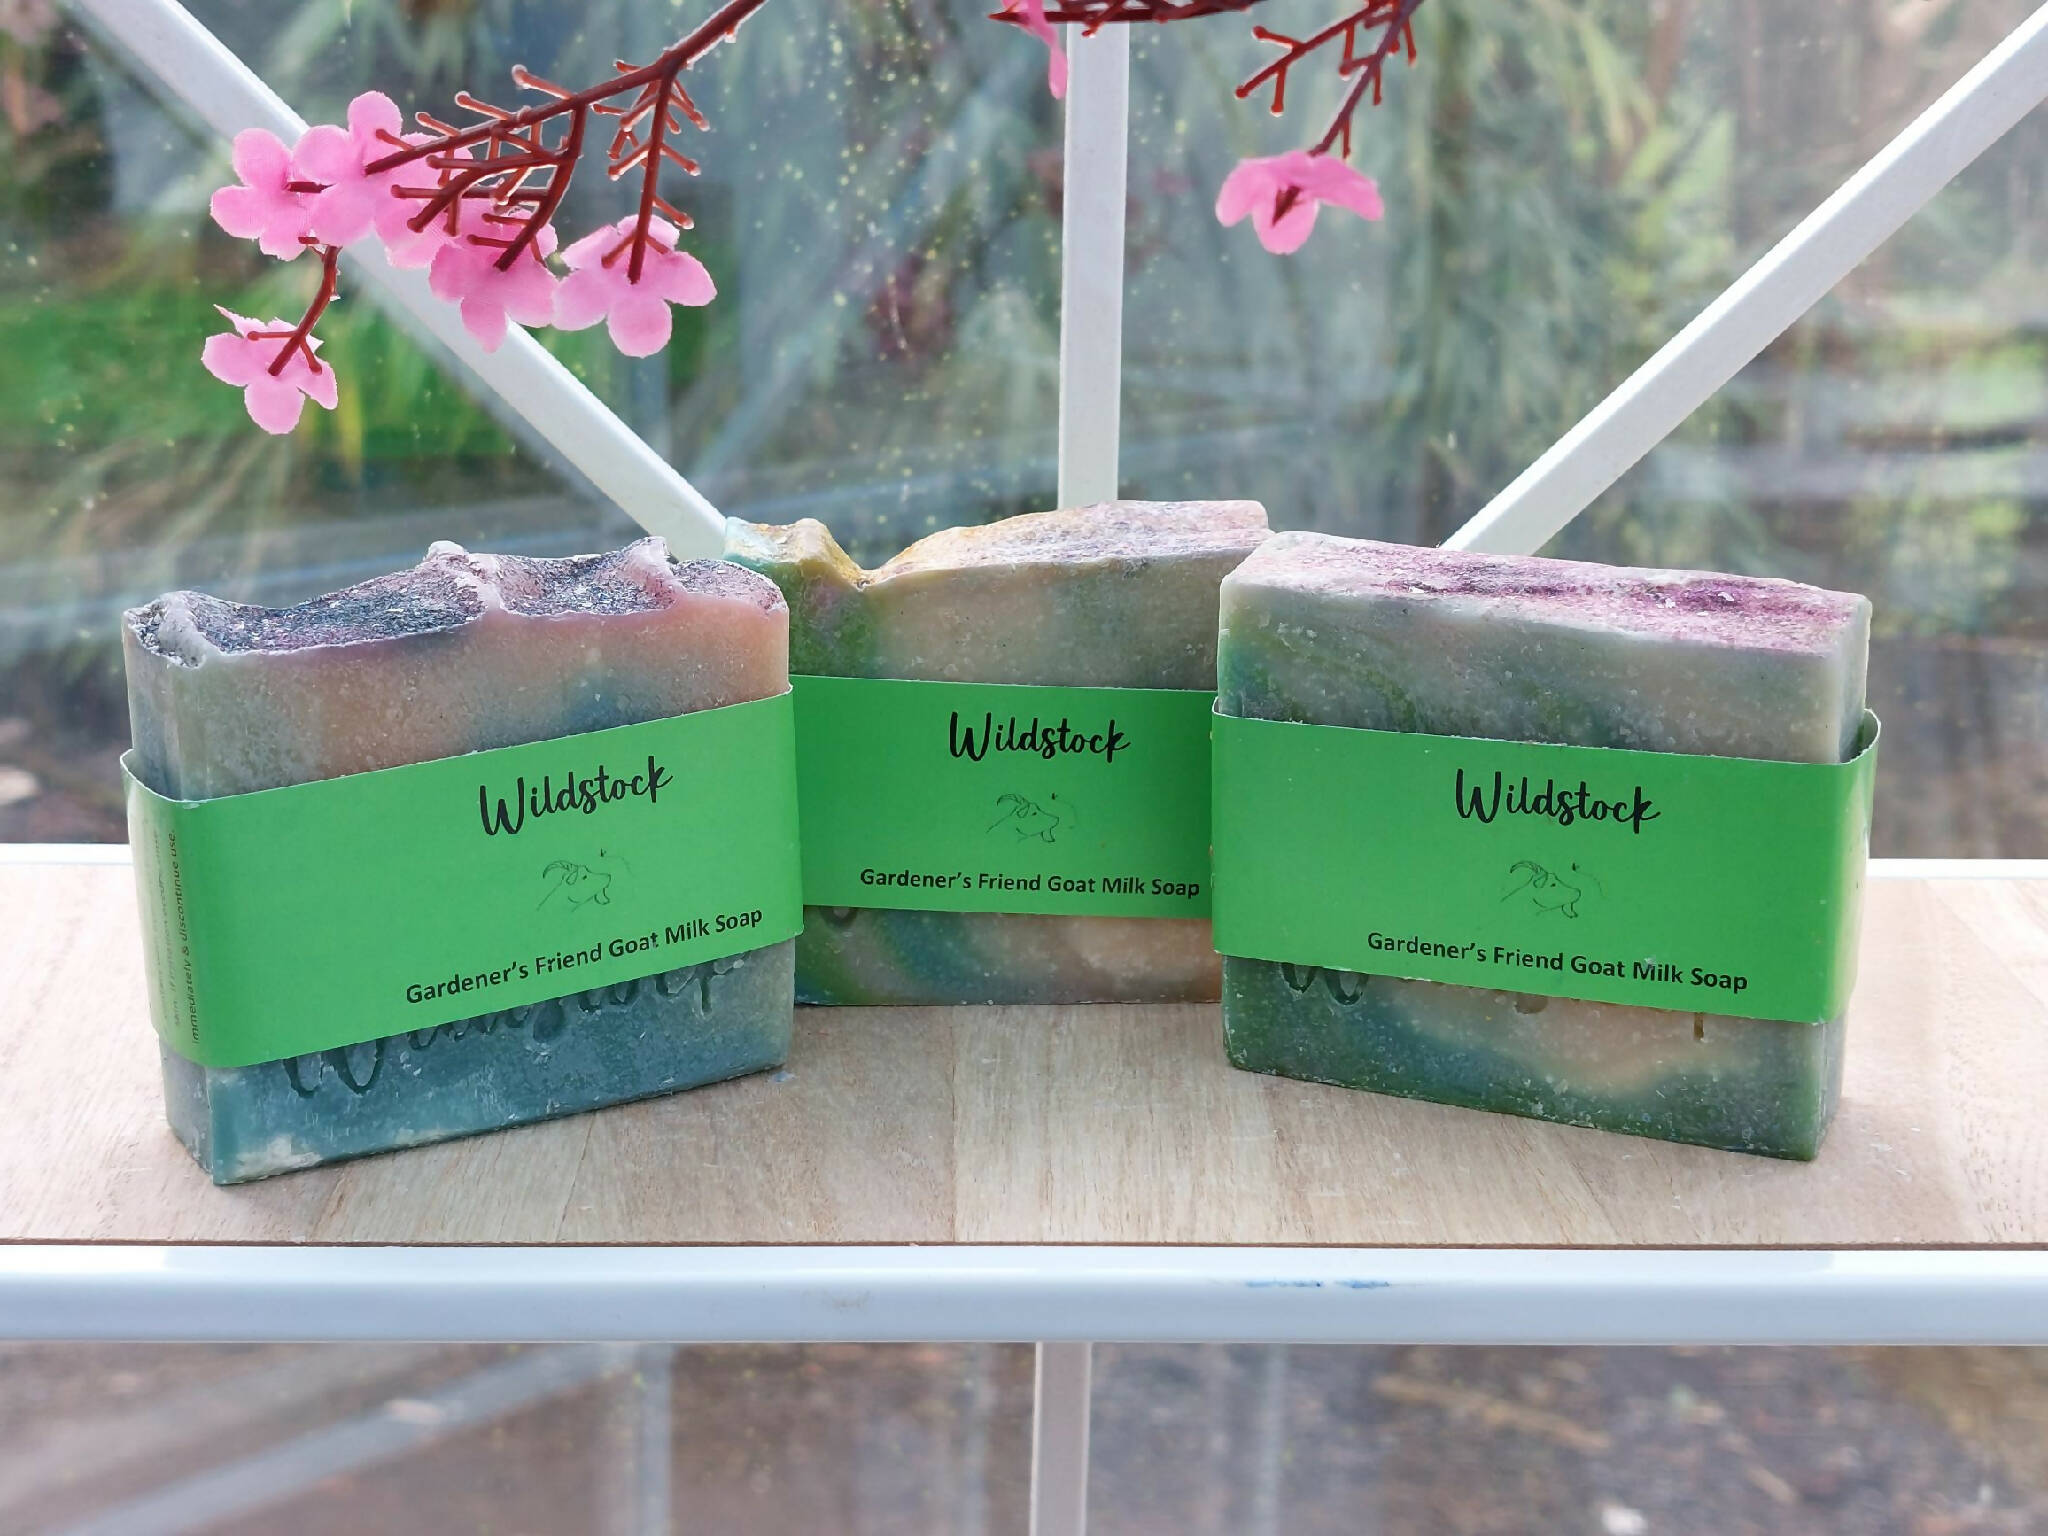 Wildstock 'Feeling Outdoorsy' Goat Milk Soap Collection